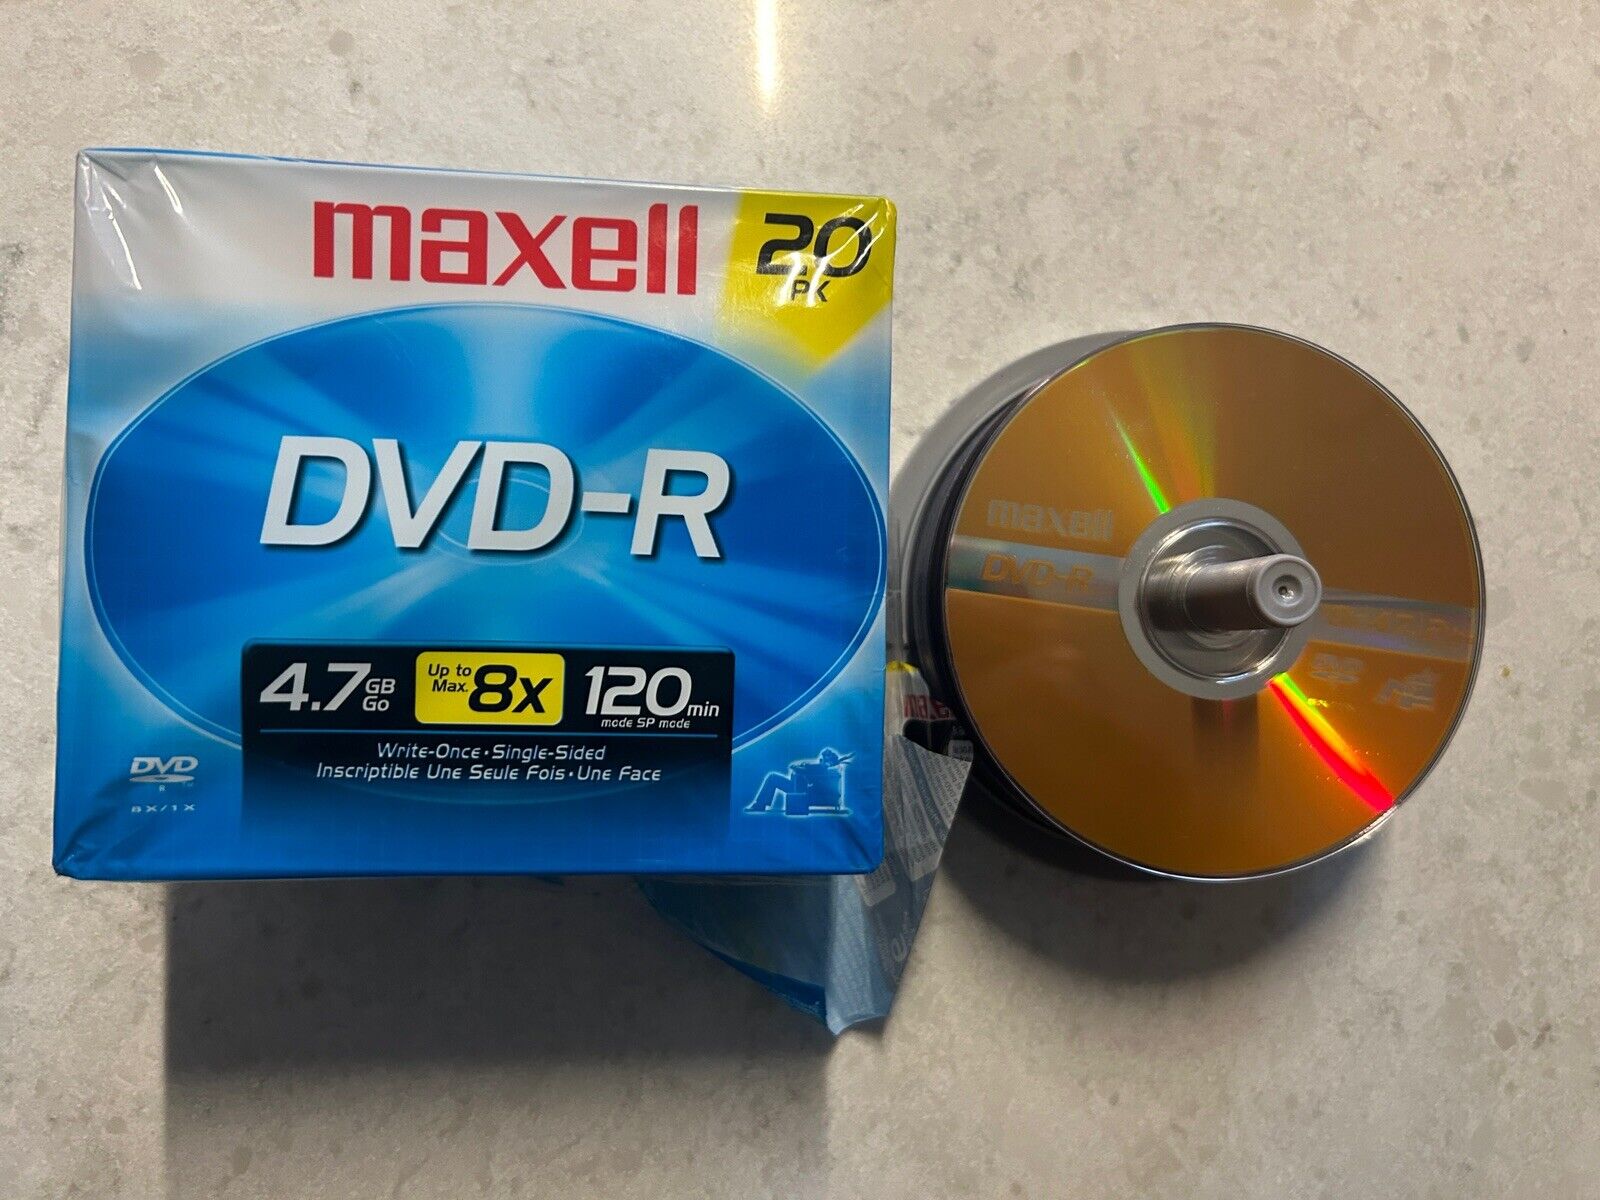 Maxell DVD+R 4.7GB 8X Spindle And Individuals 48 Total Disc Lot